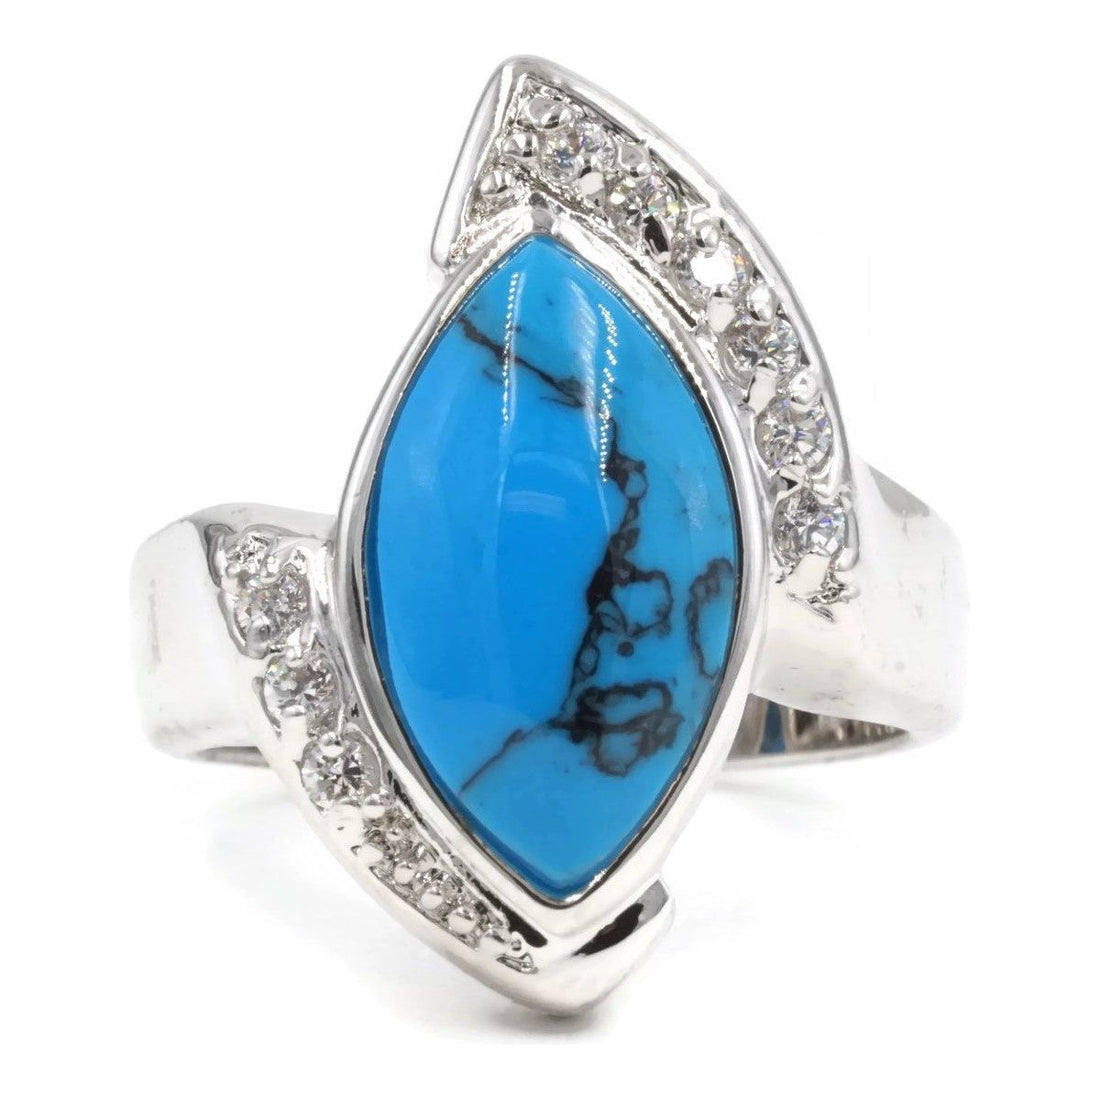 Asymmetrical Cultivated Turquoise Blue Stone Ring